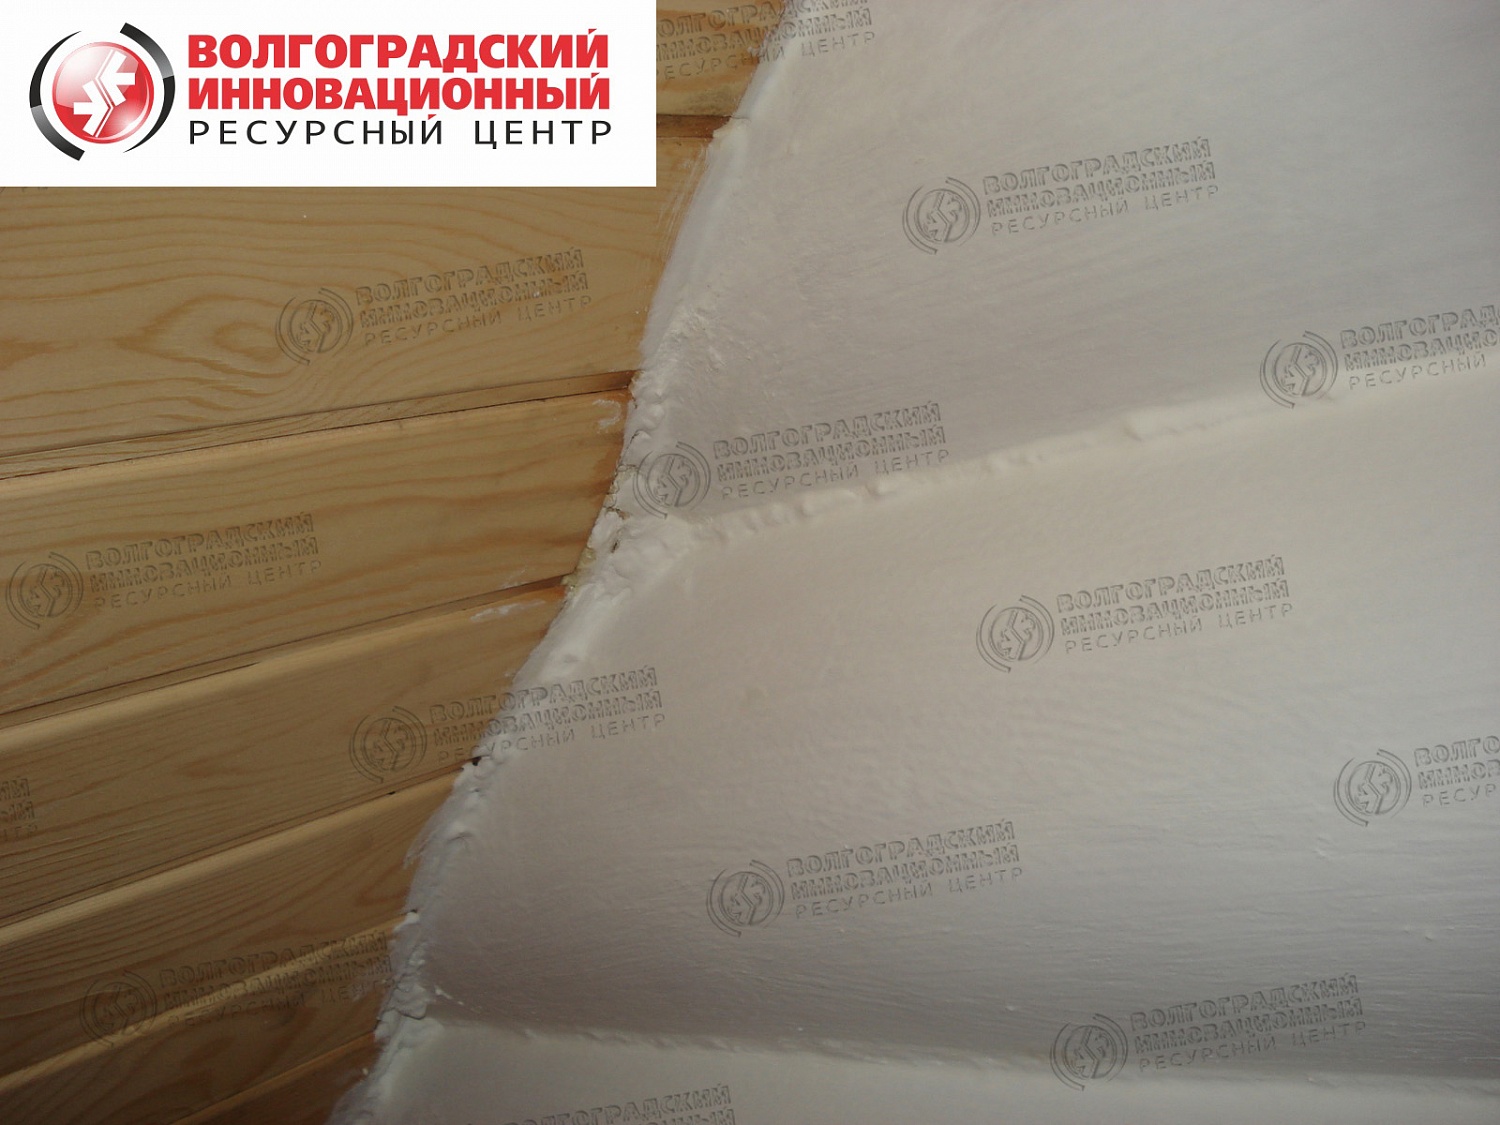 Competence in thermal insulation of wooden structures, residential wooden log and block log cabins